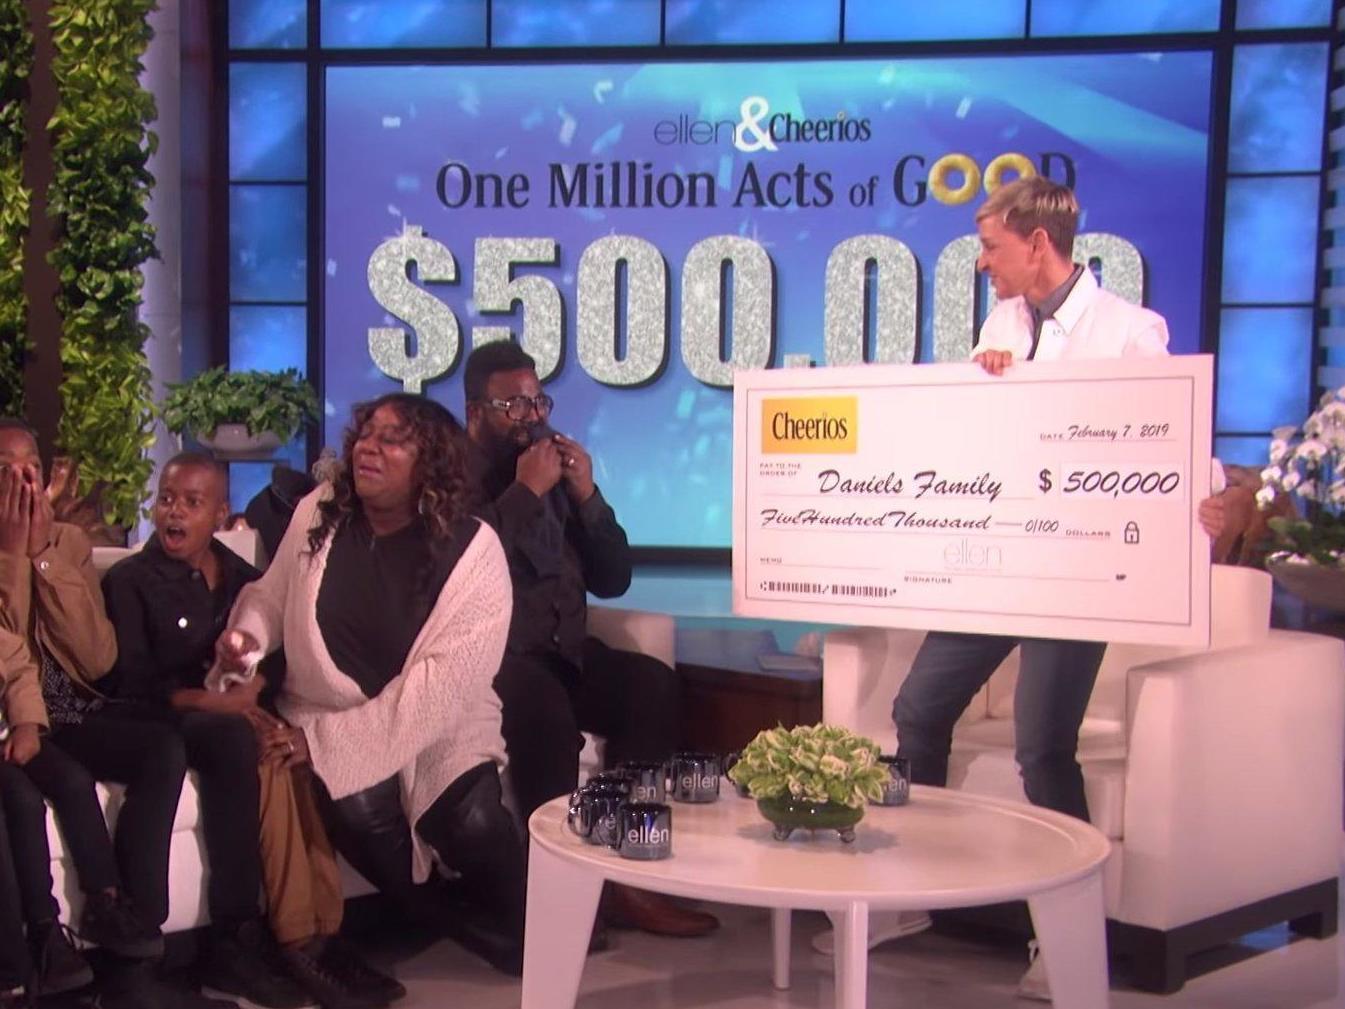 Ellen Degeneres Gives Family 1m In Record Giveaway The Independent - 